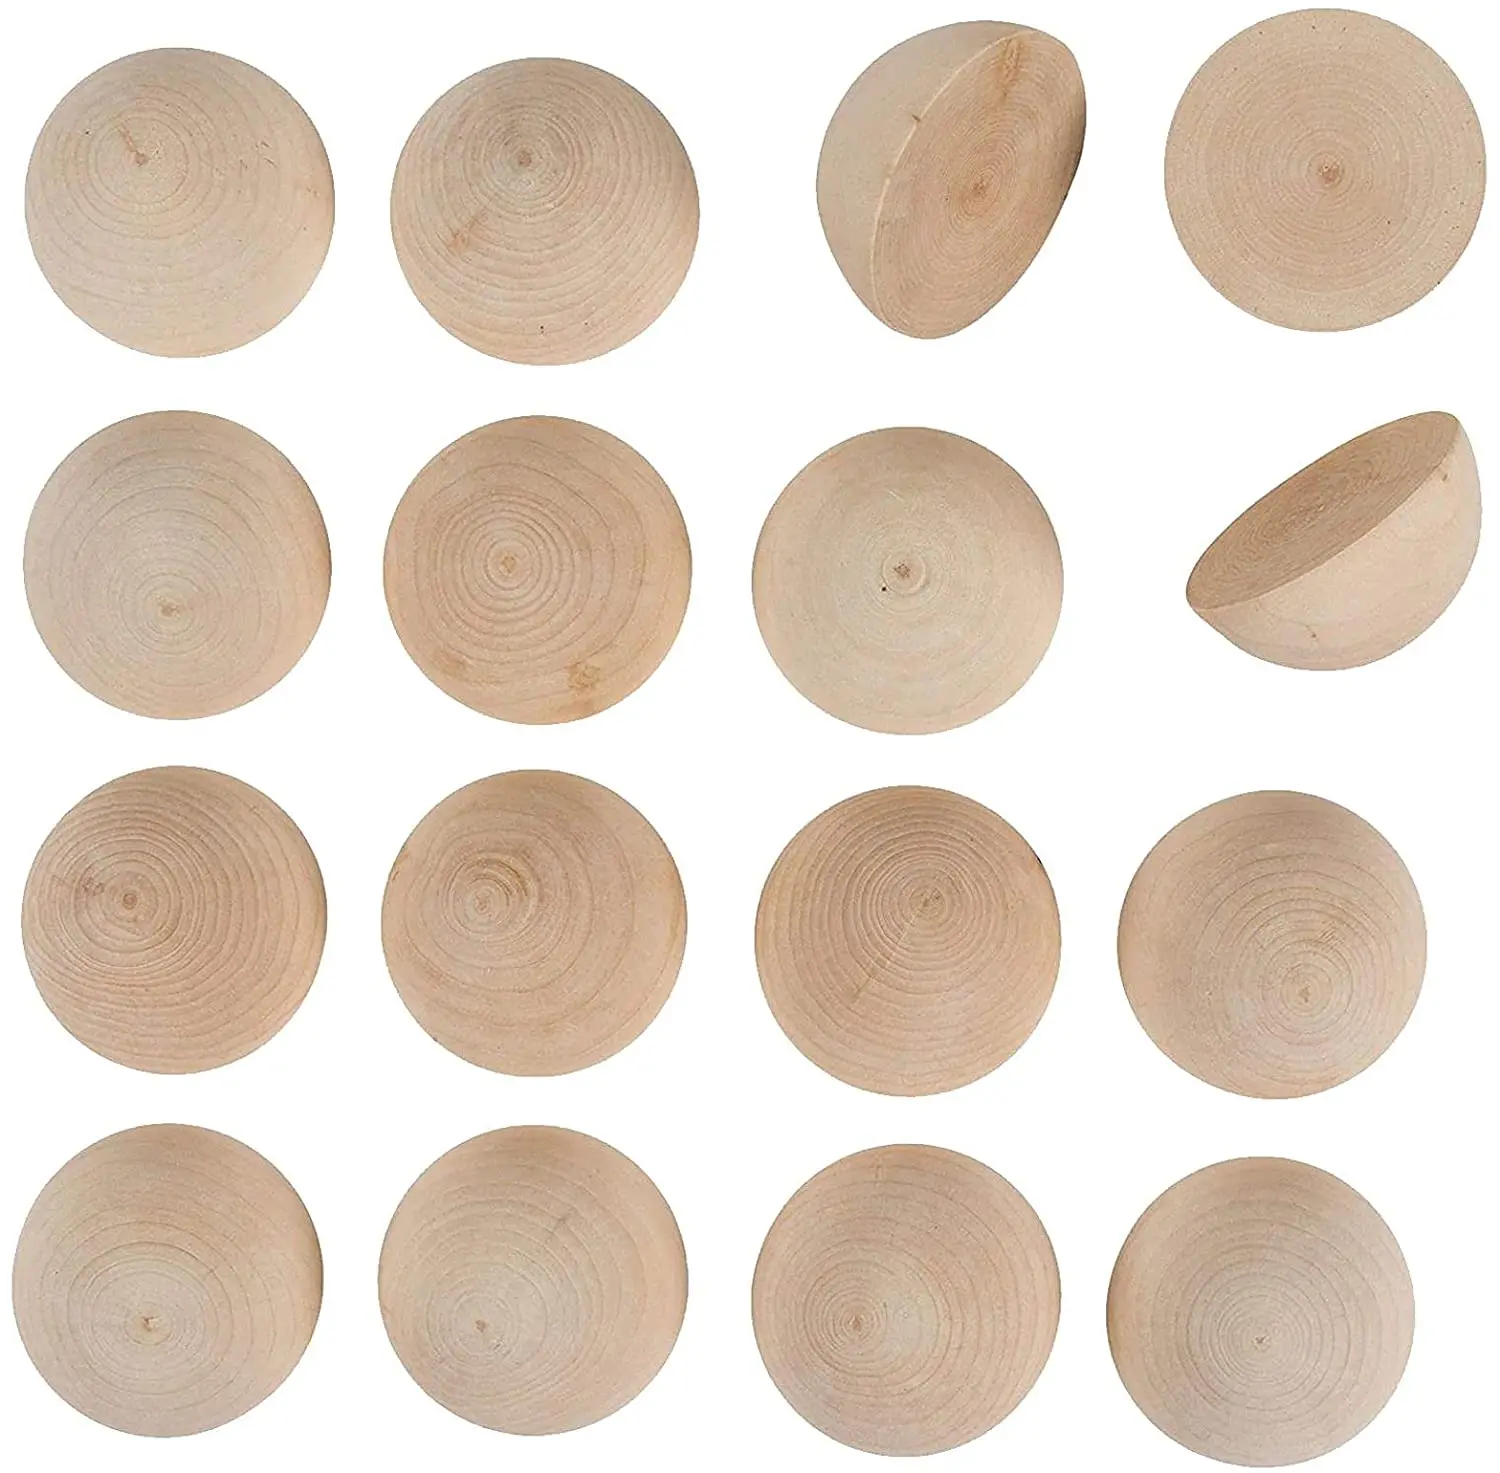 

Tailai Unfinished Split Wooden Balls Half Cut Wood for Crafts Kids DIY Projects Dropshipping